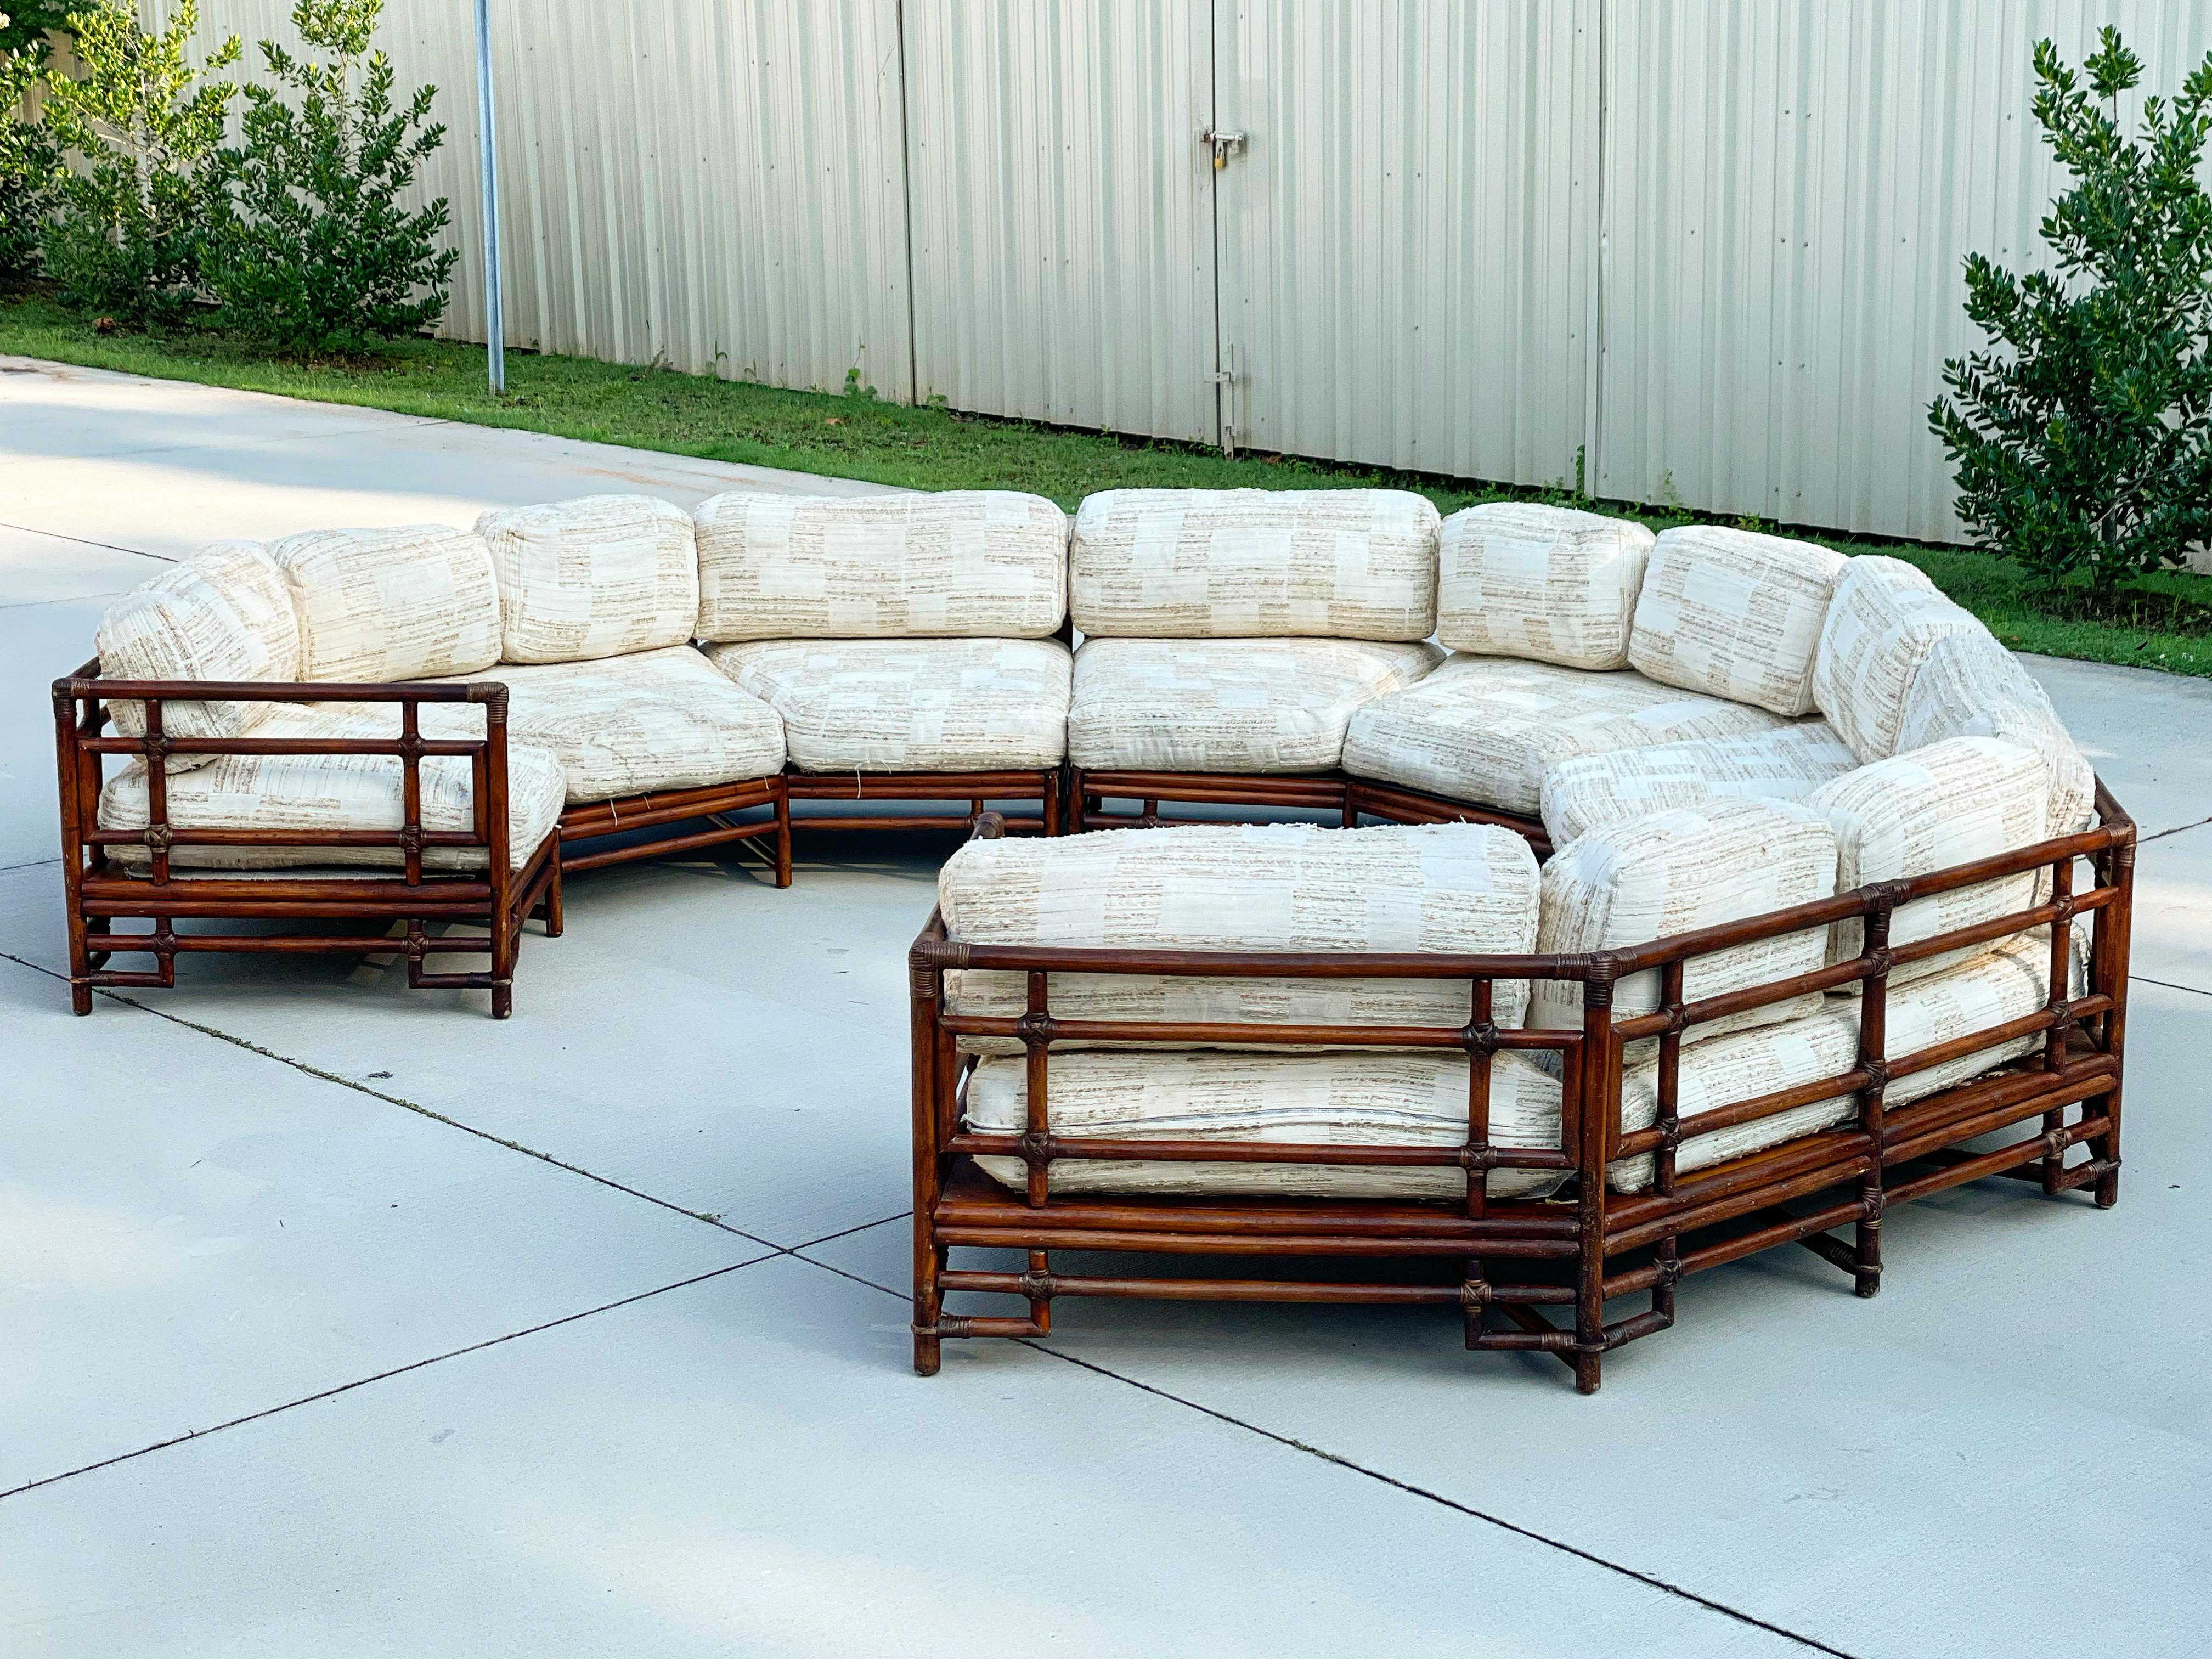 Rare monumental rattan semi circular sectional sofa by Ficks Reed, circa 1975. Pit Group style with seating for 10-12 people. Truly a statement piece and unique on the market. 3 piece sectional sofa. Rattan frame is in excellent condition. It has